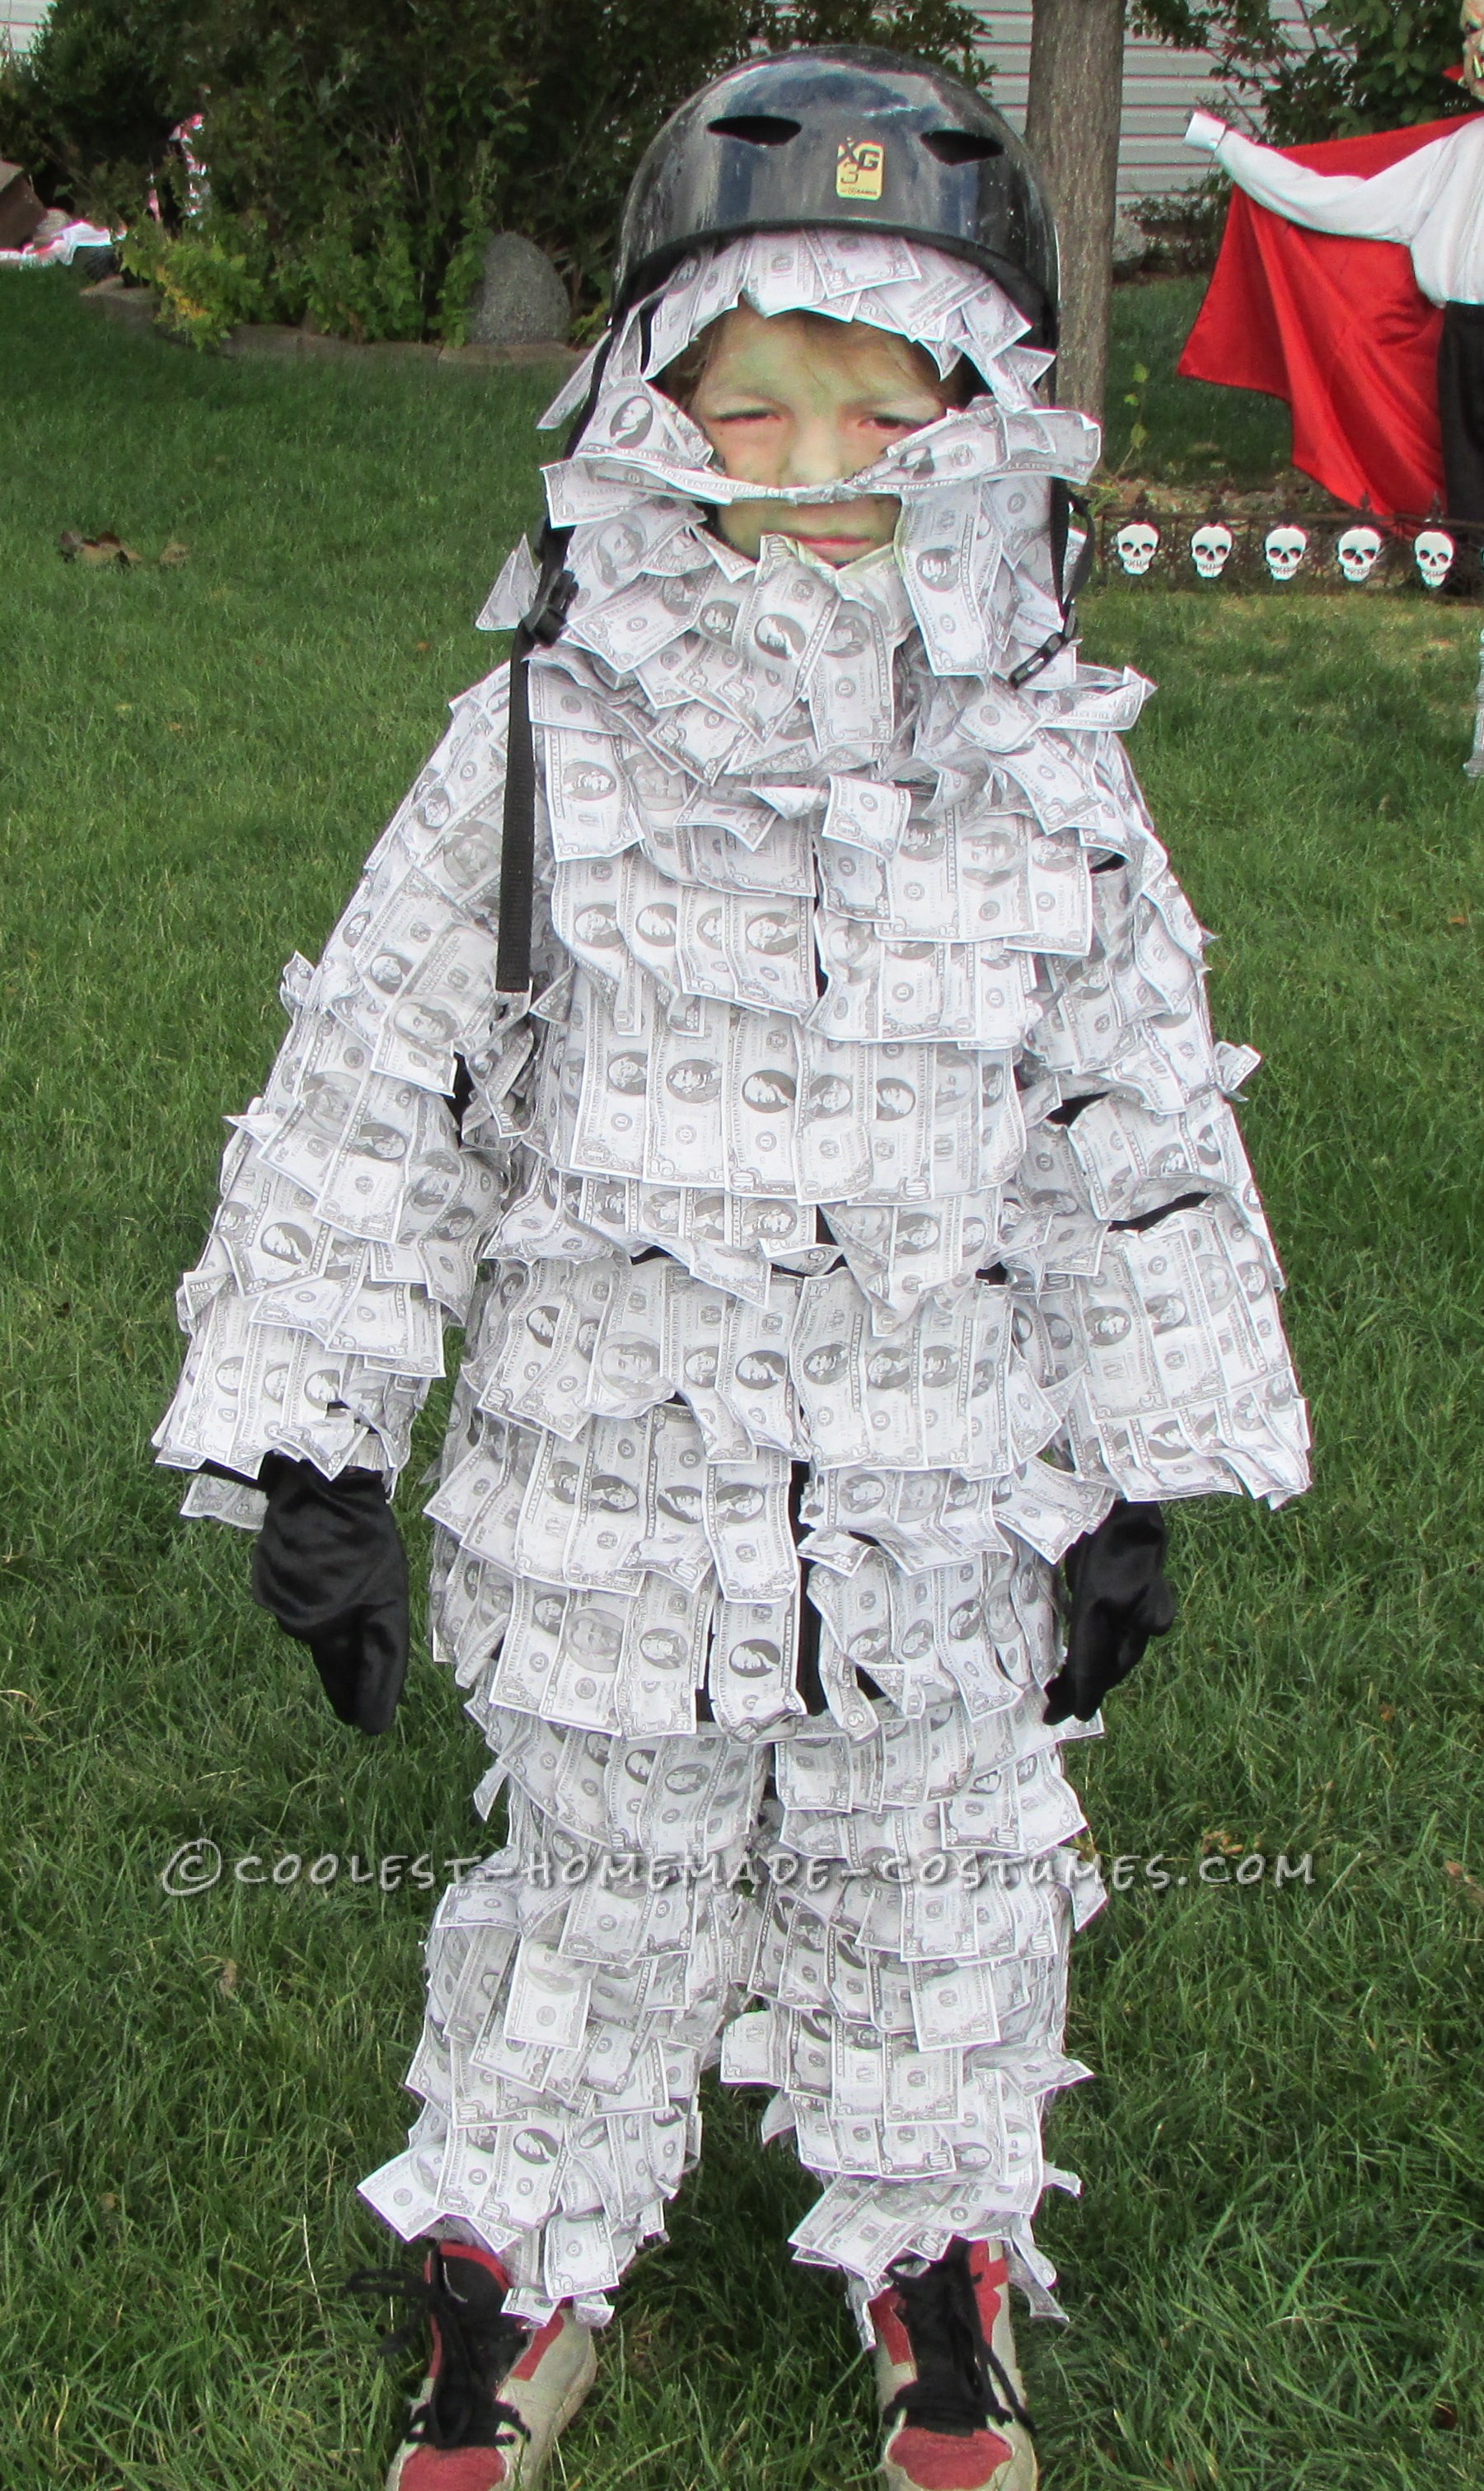 Cool Homemade Geico Money Man Halloween Costume for a Child